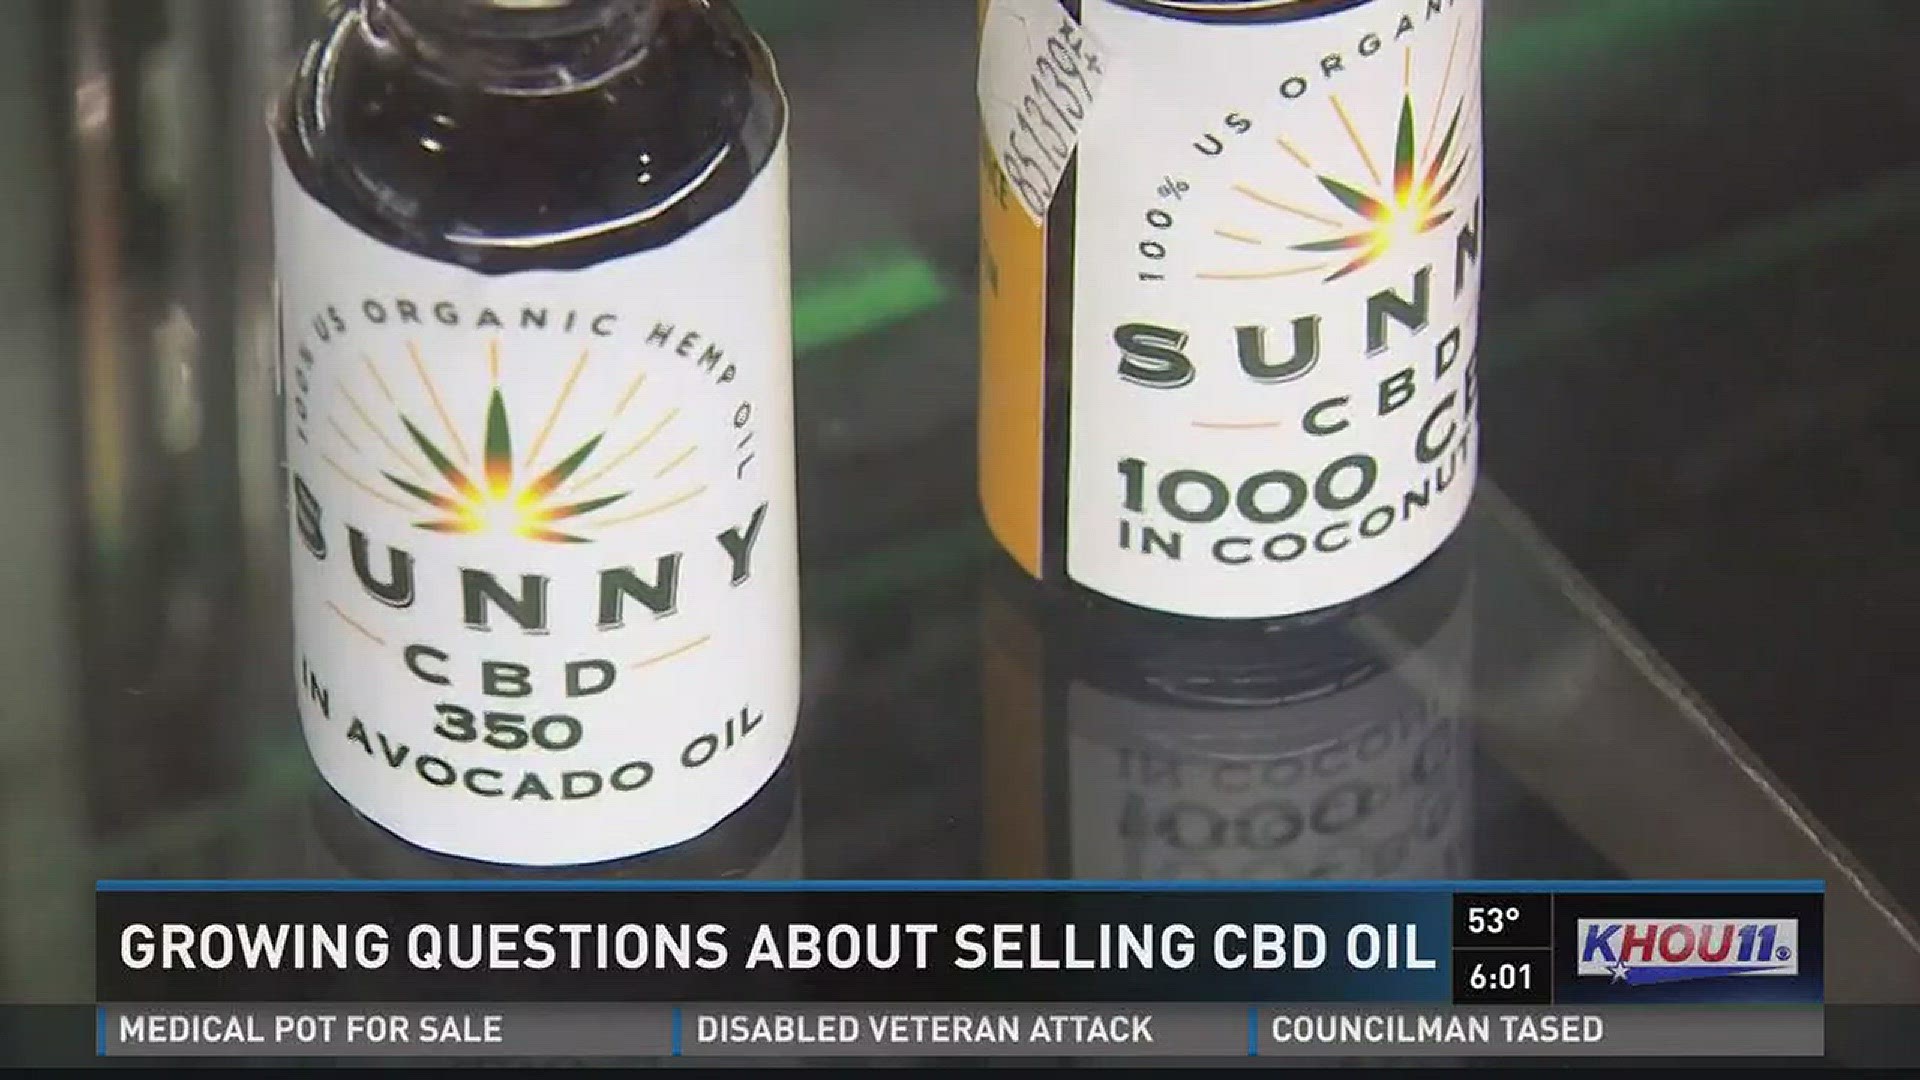 A hemp extract known as CBD oil is selling fast at local Houston-area smoke shops. But the legal ambiguity of CBD oils and extracts has left many government agencies scratching their heads.